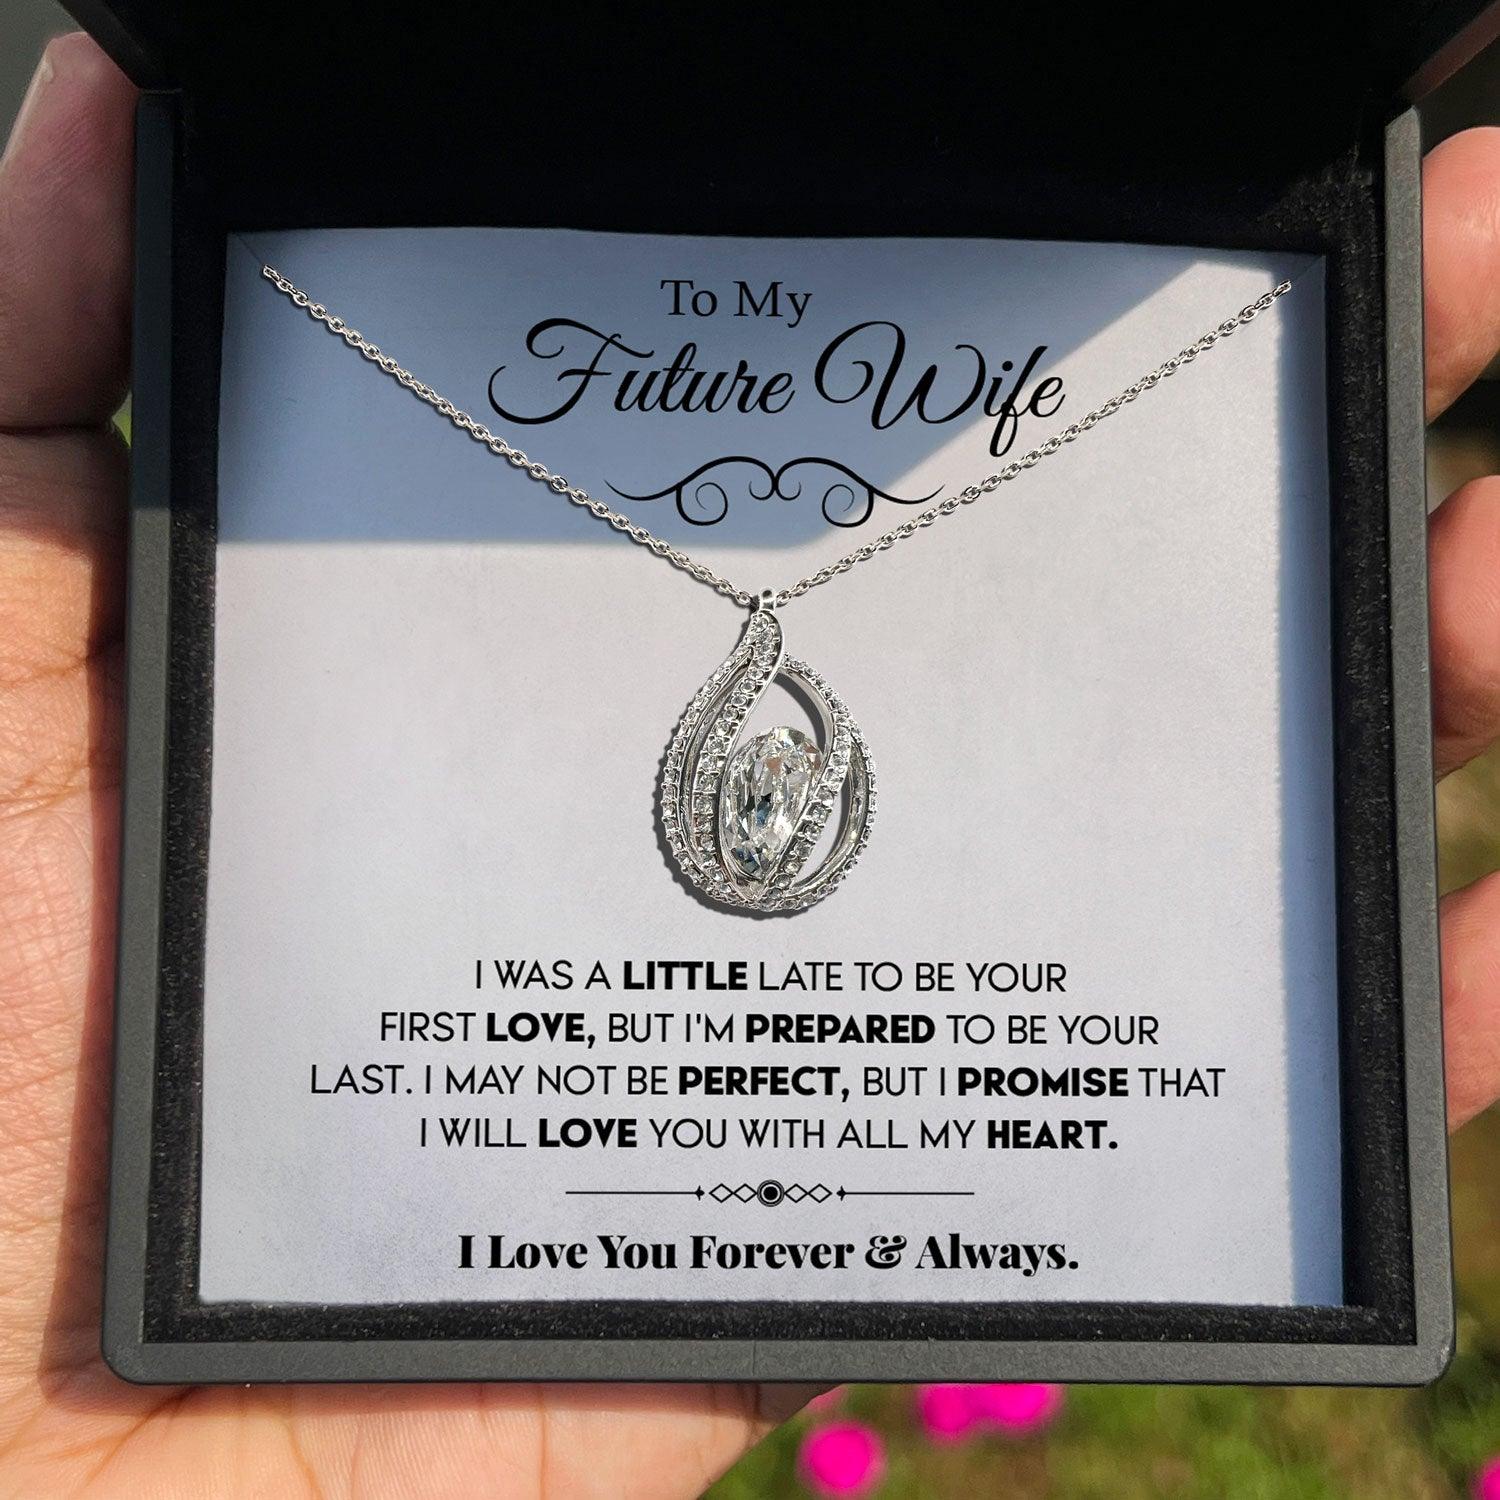 To My Future Wife - I Will Love You With All My Heart - Orbital Birdcage Necklace - TRYNDI